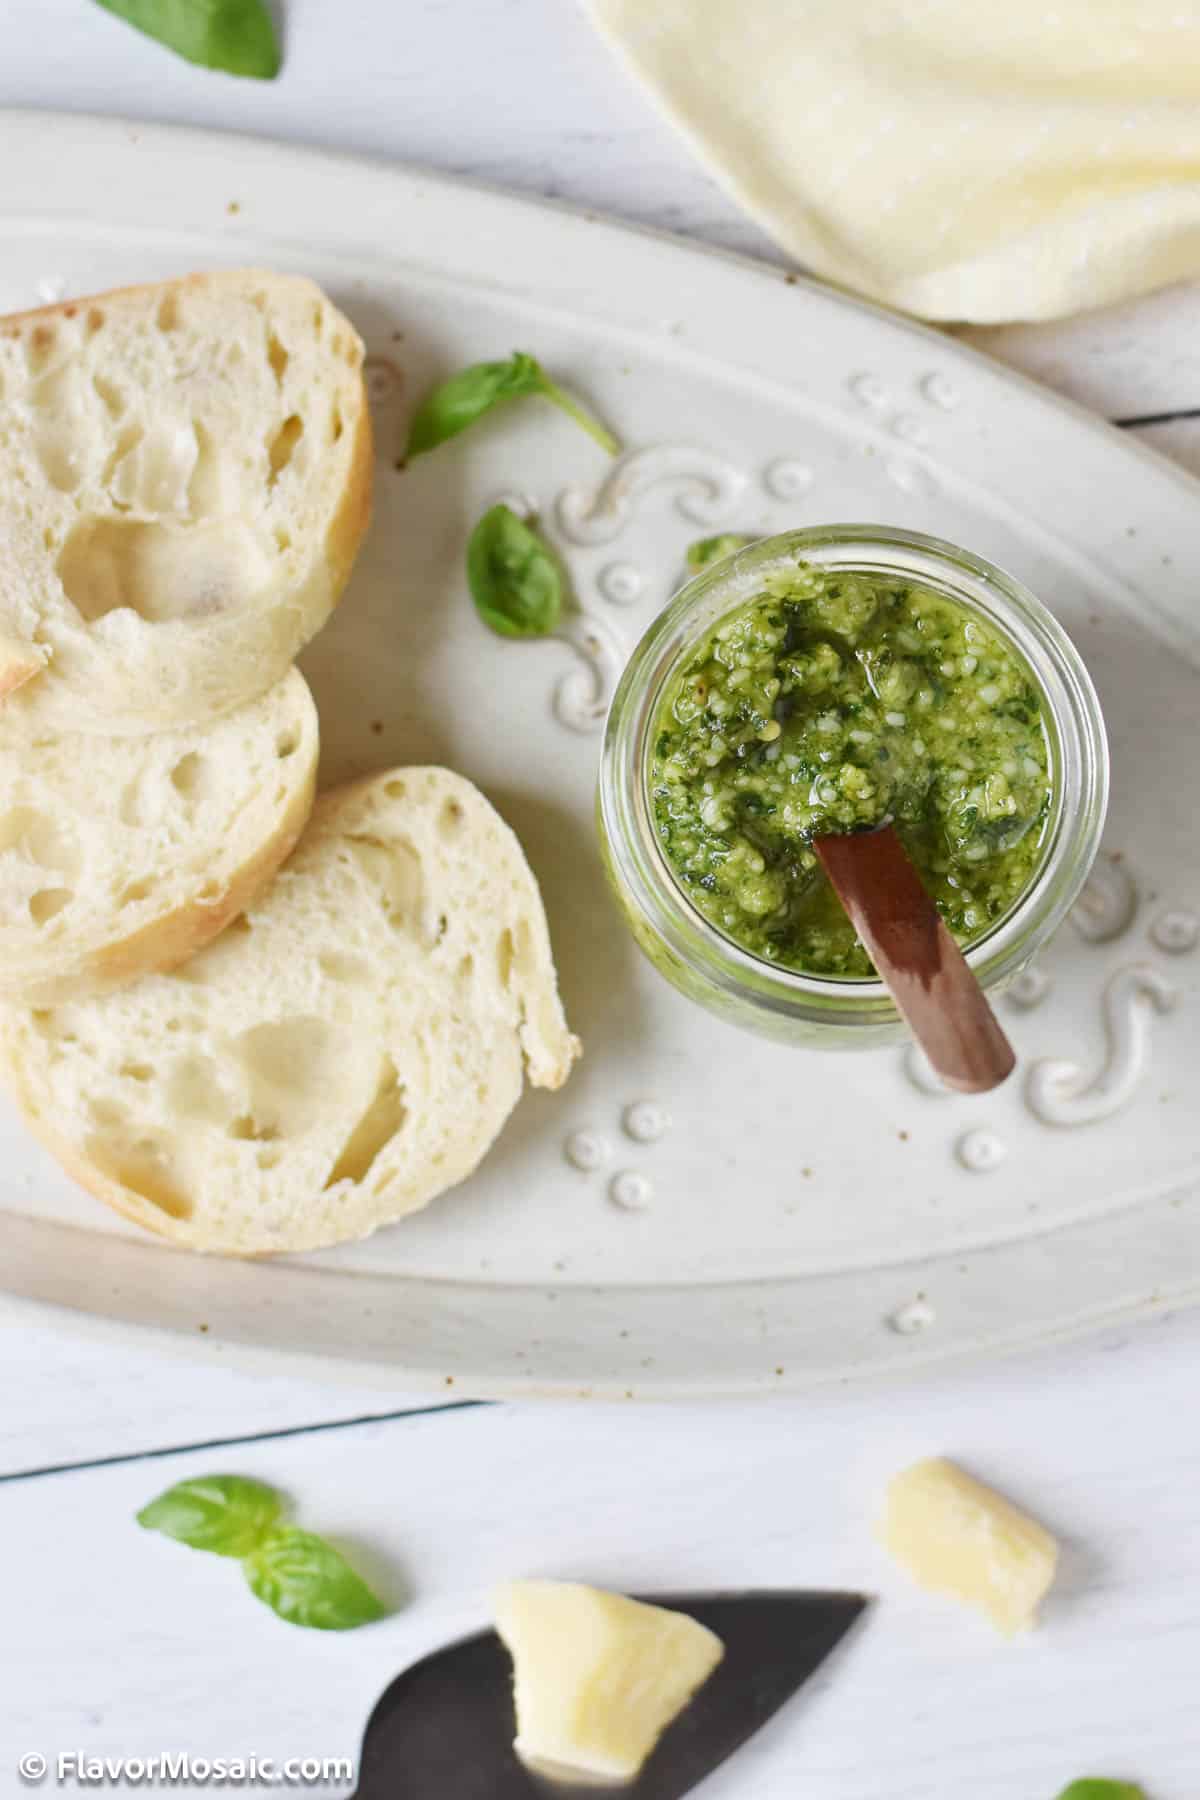 Overhead photo of a jar of pesto with a wooden spoon sticking out of it, sitting on a white plate next to small white pieces of bread. Surrounded by very small basil leaves and chunks of parmesan cheese.